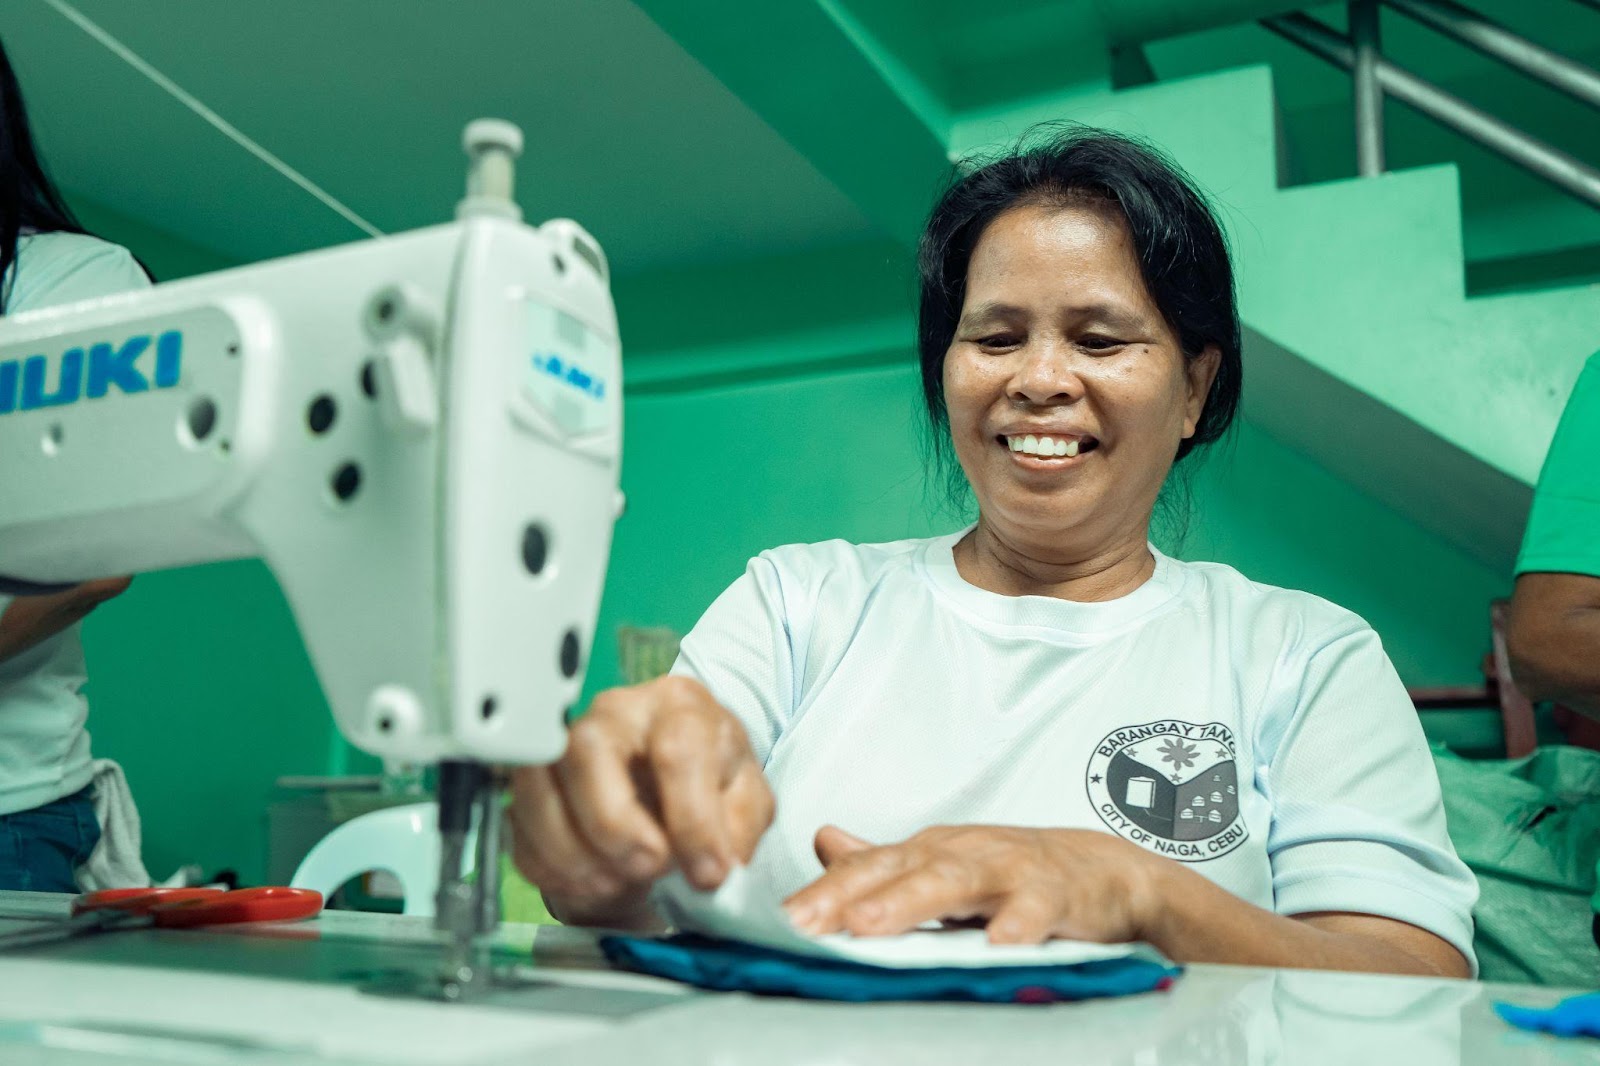 Ceria-uses-high-powered-sewing-machines-to-make-rags